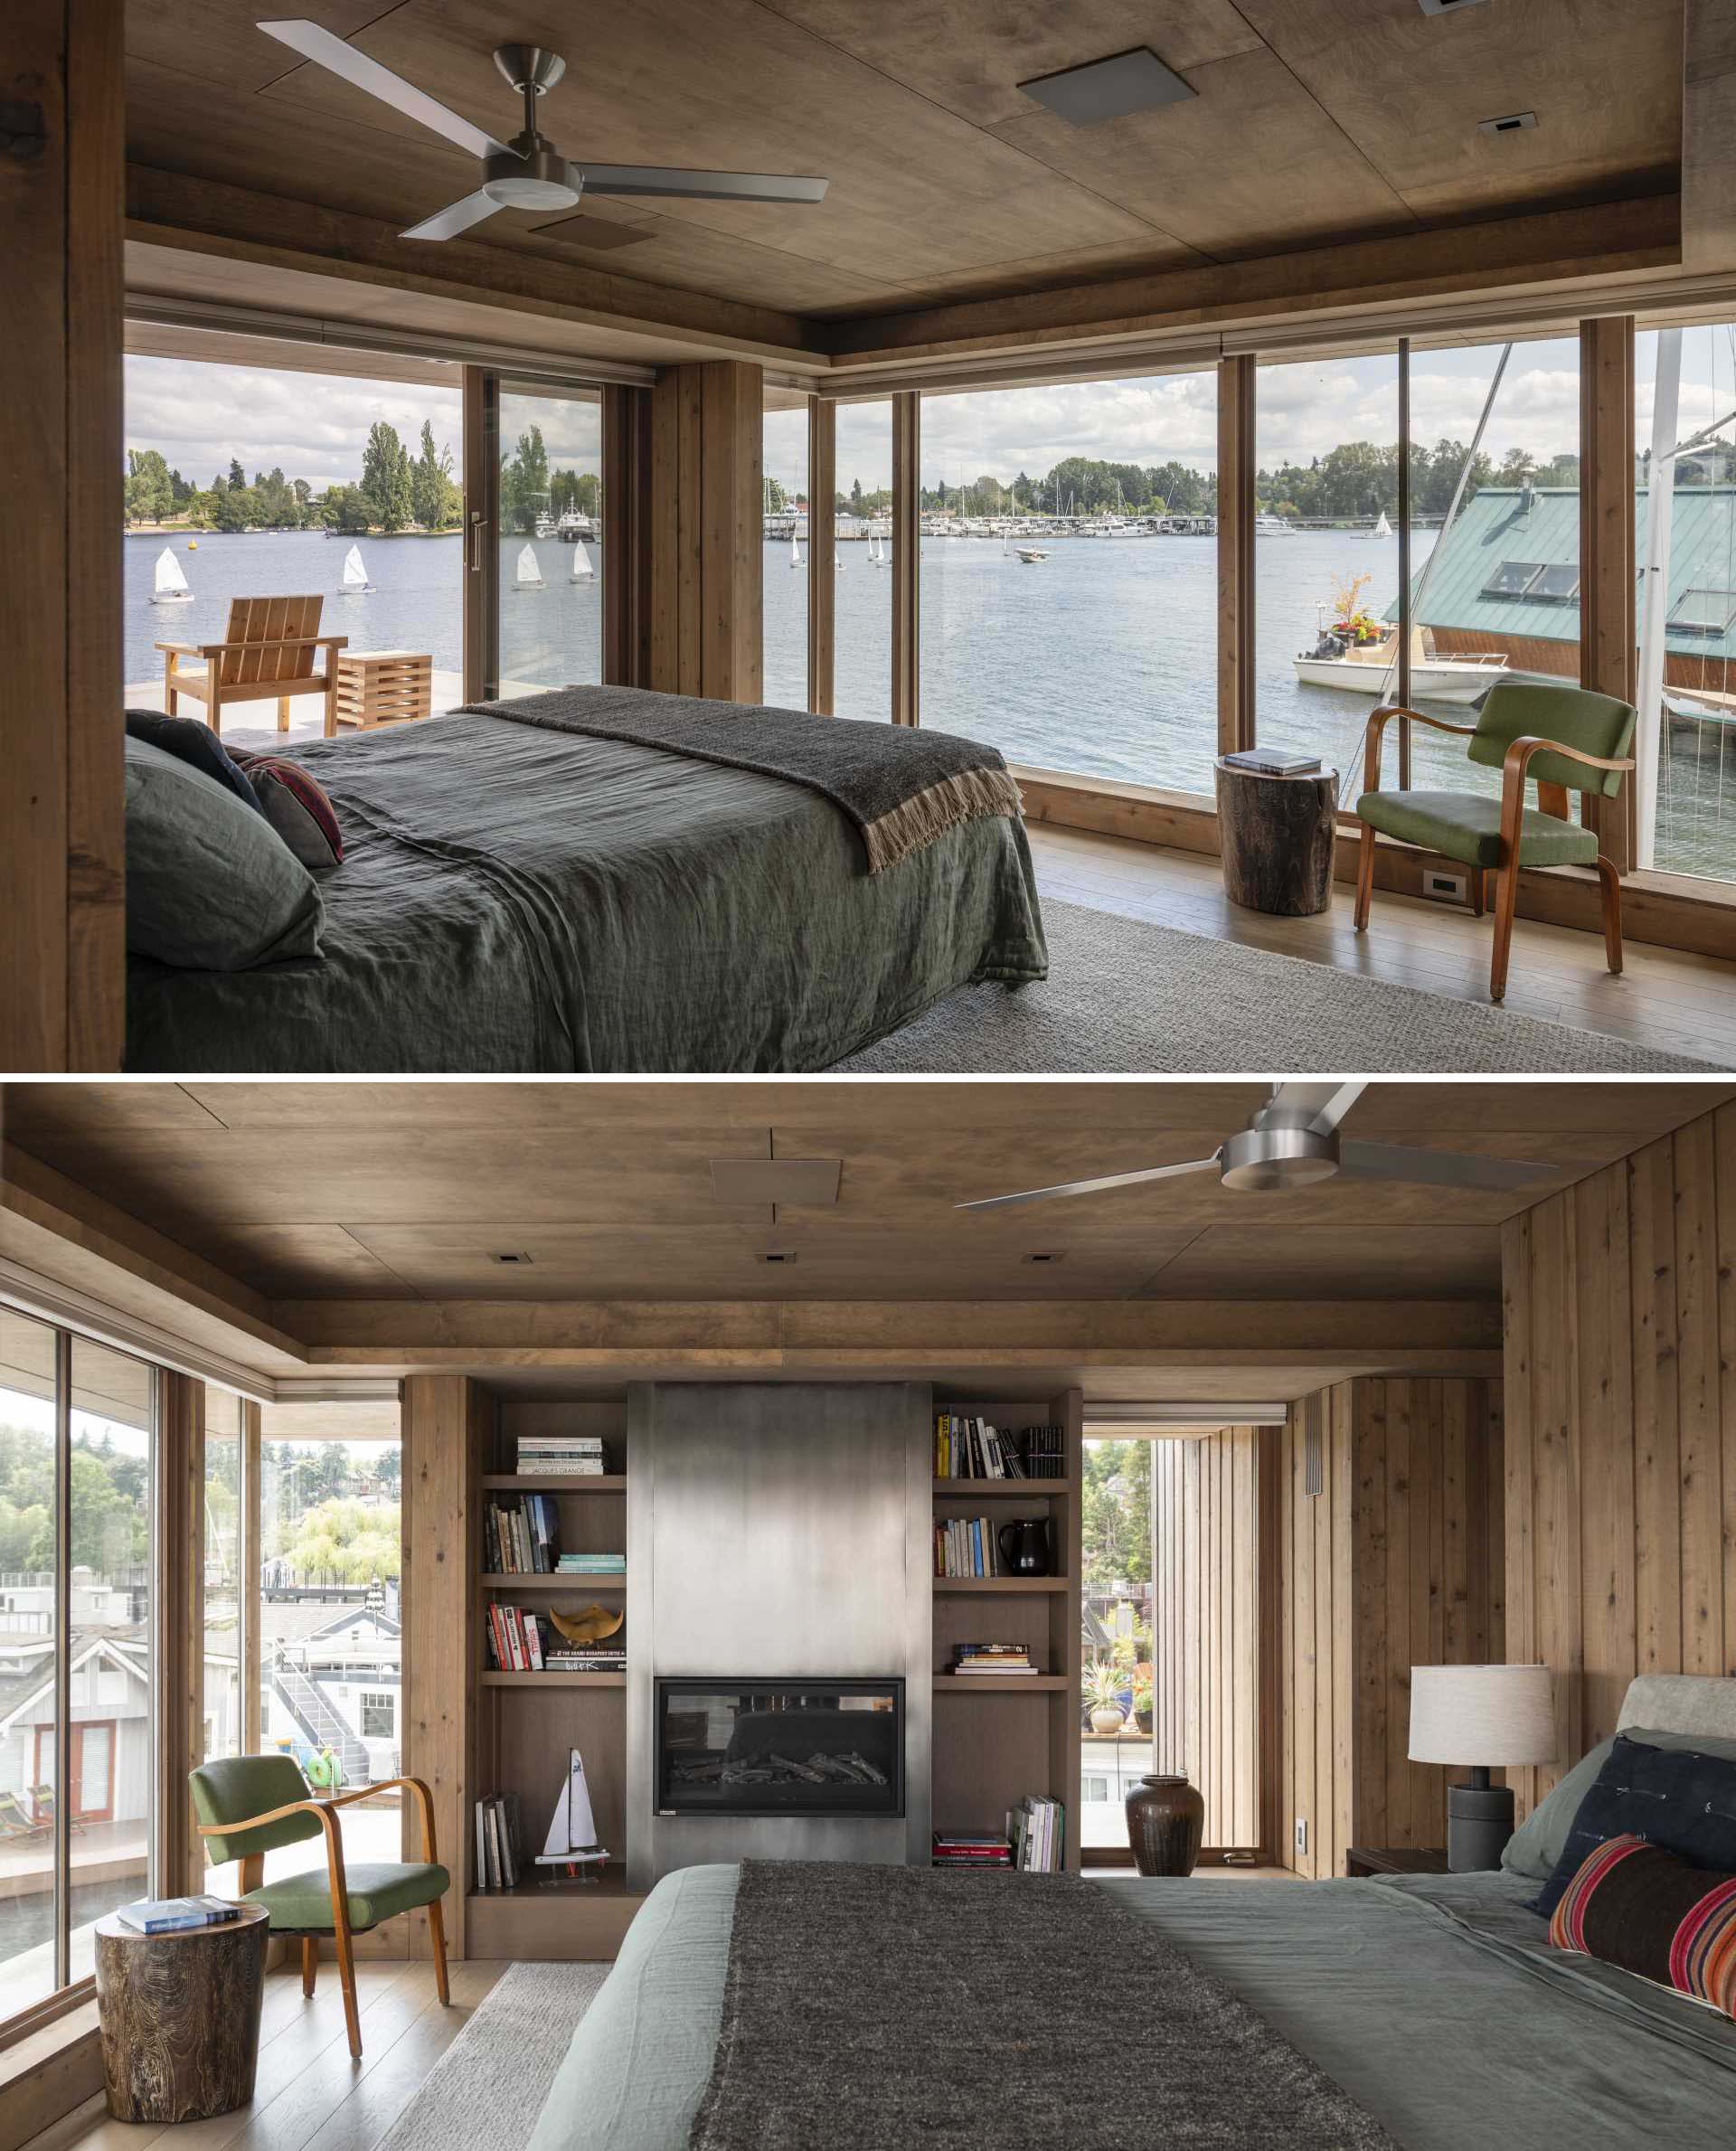 This primary bedroom includes floor-to-ceiling windows and sliding doors, as well as a fireplace and built-in shelving.